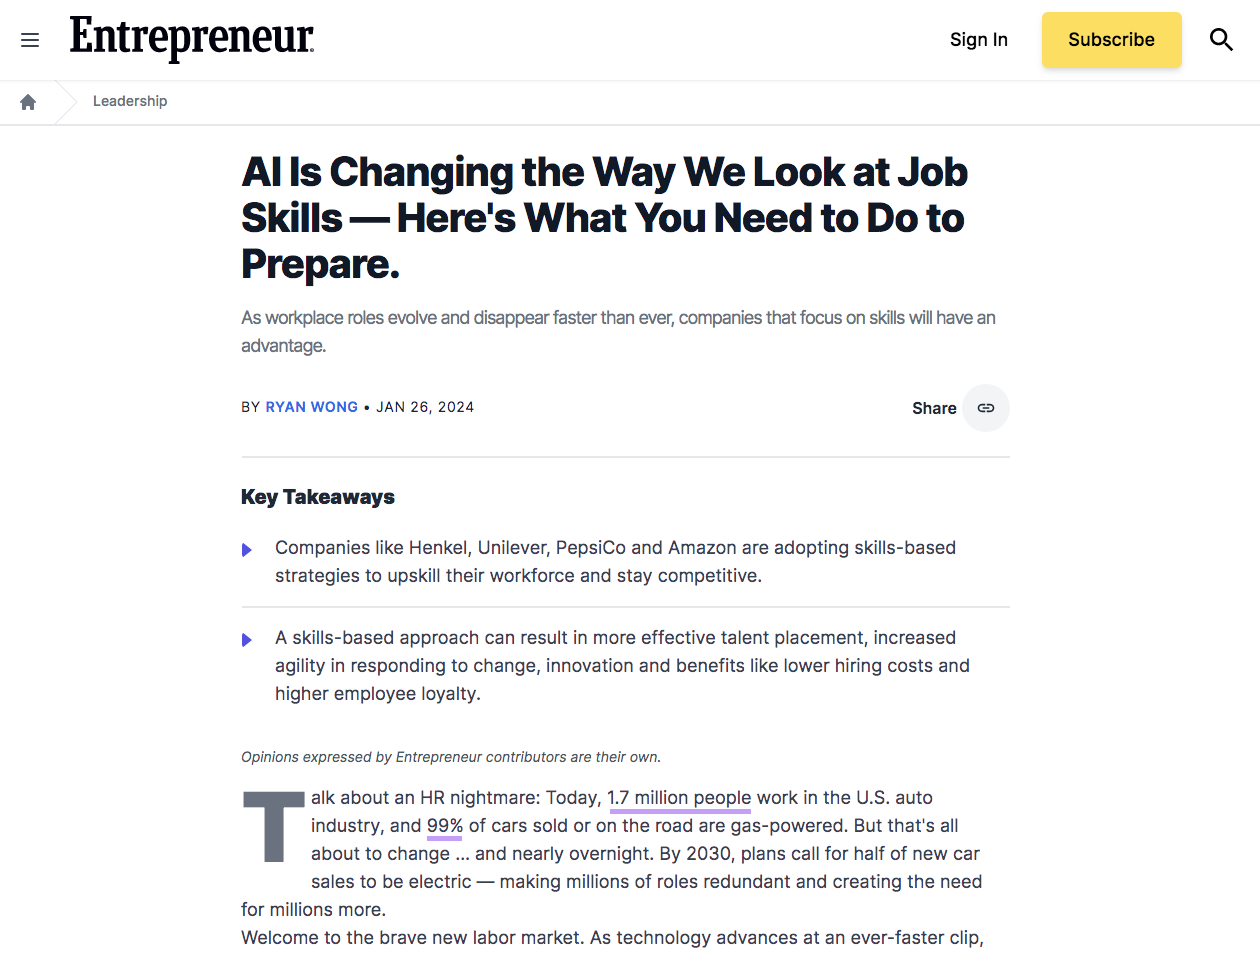 Entrepreneur's article on how AI is changing the way we look at job skills